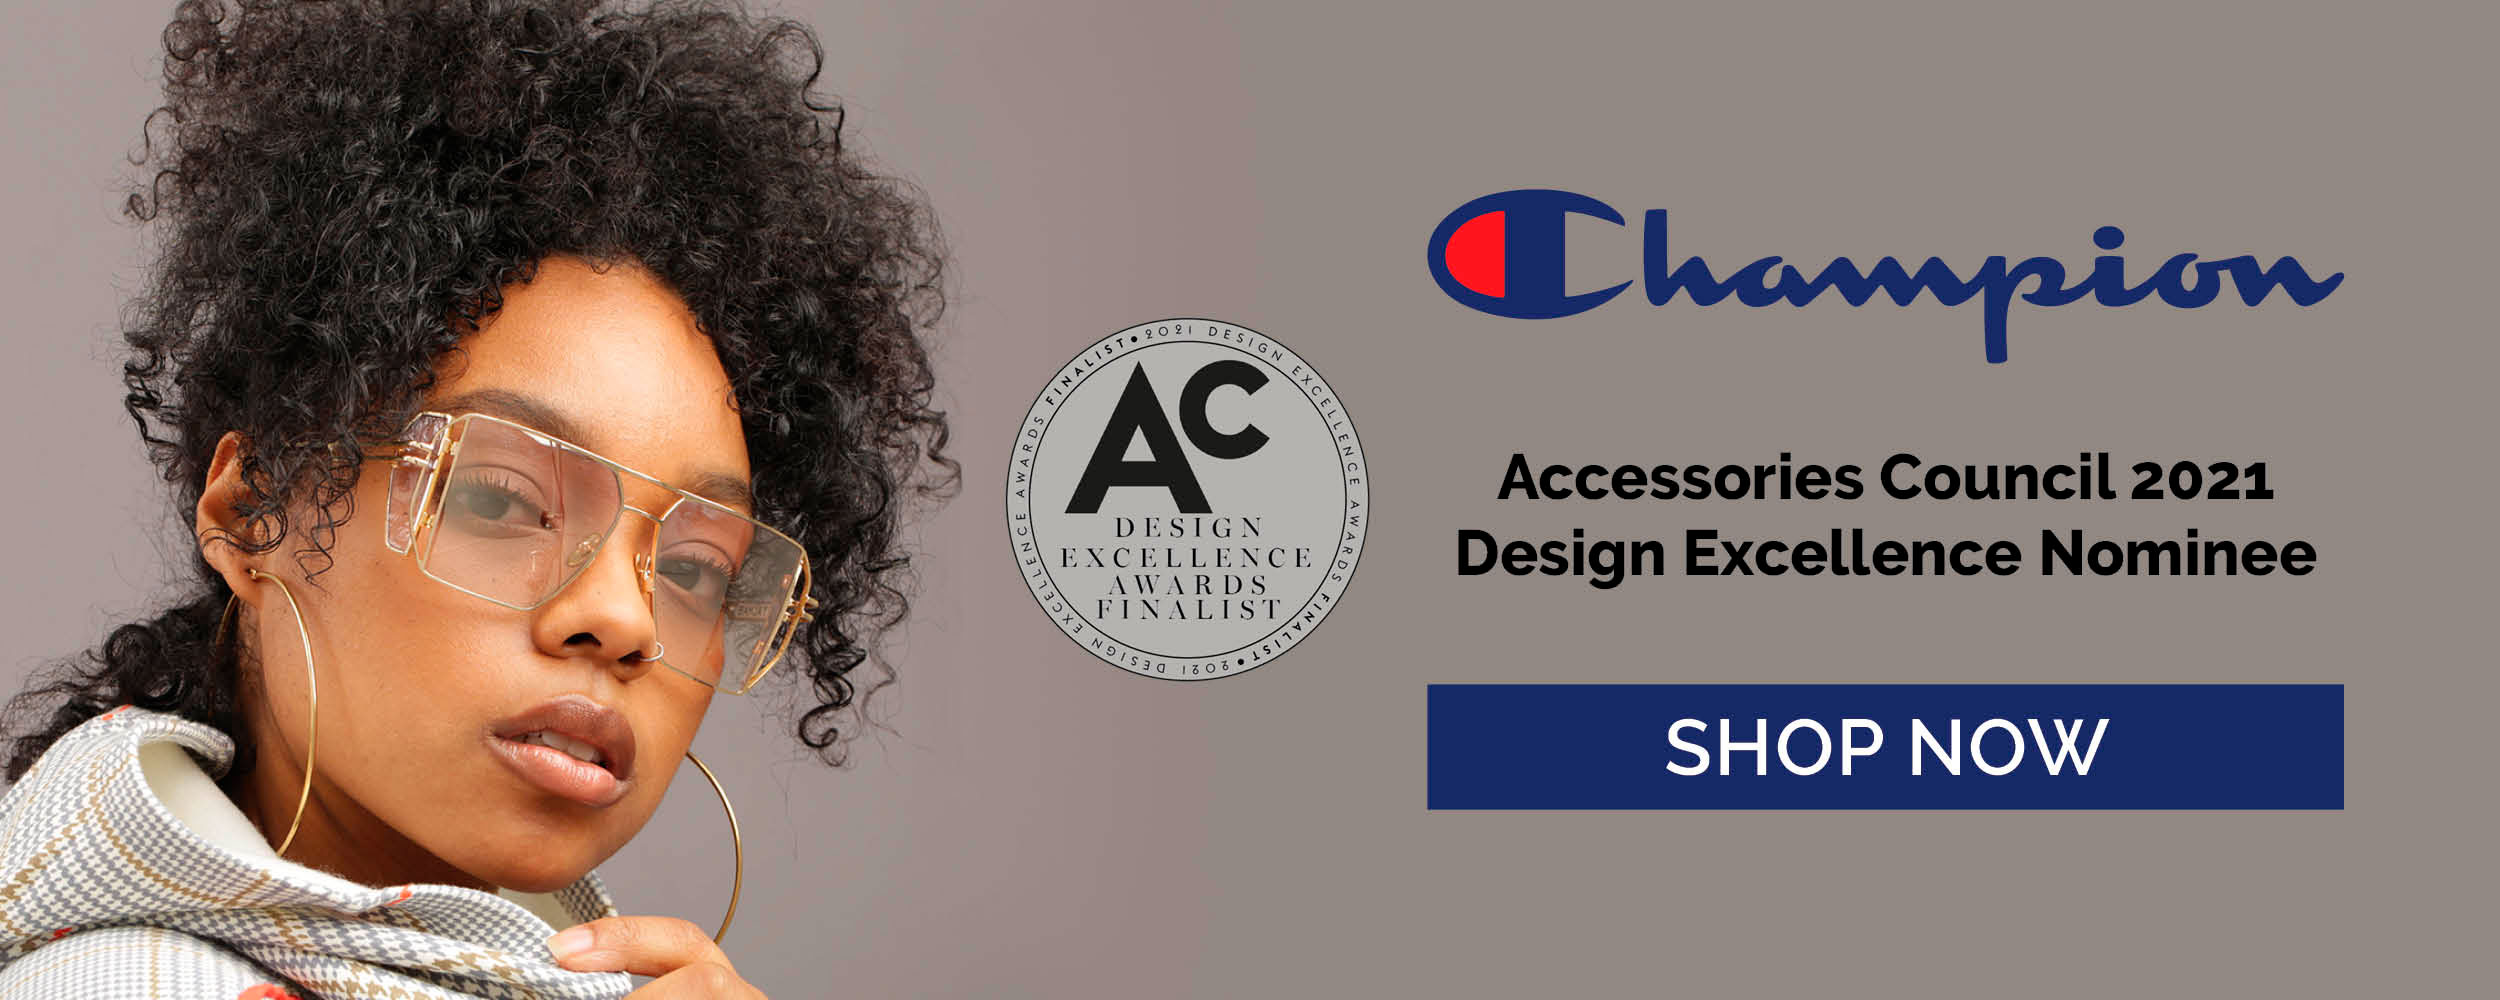 Champion. Accessories Council 2021 Design Excellence Nominee.